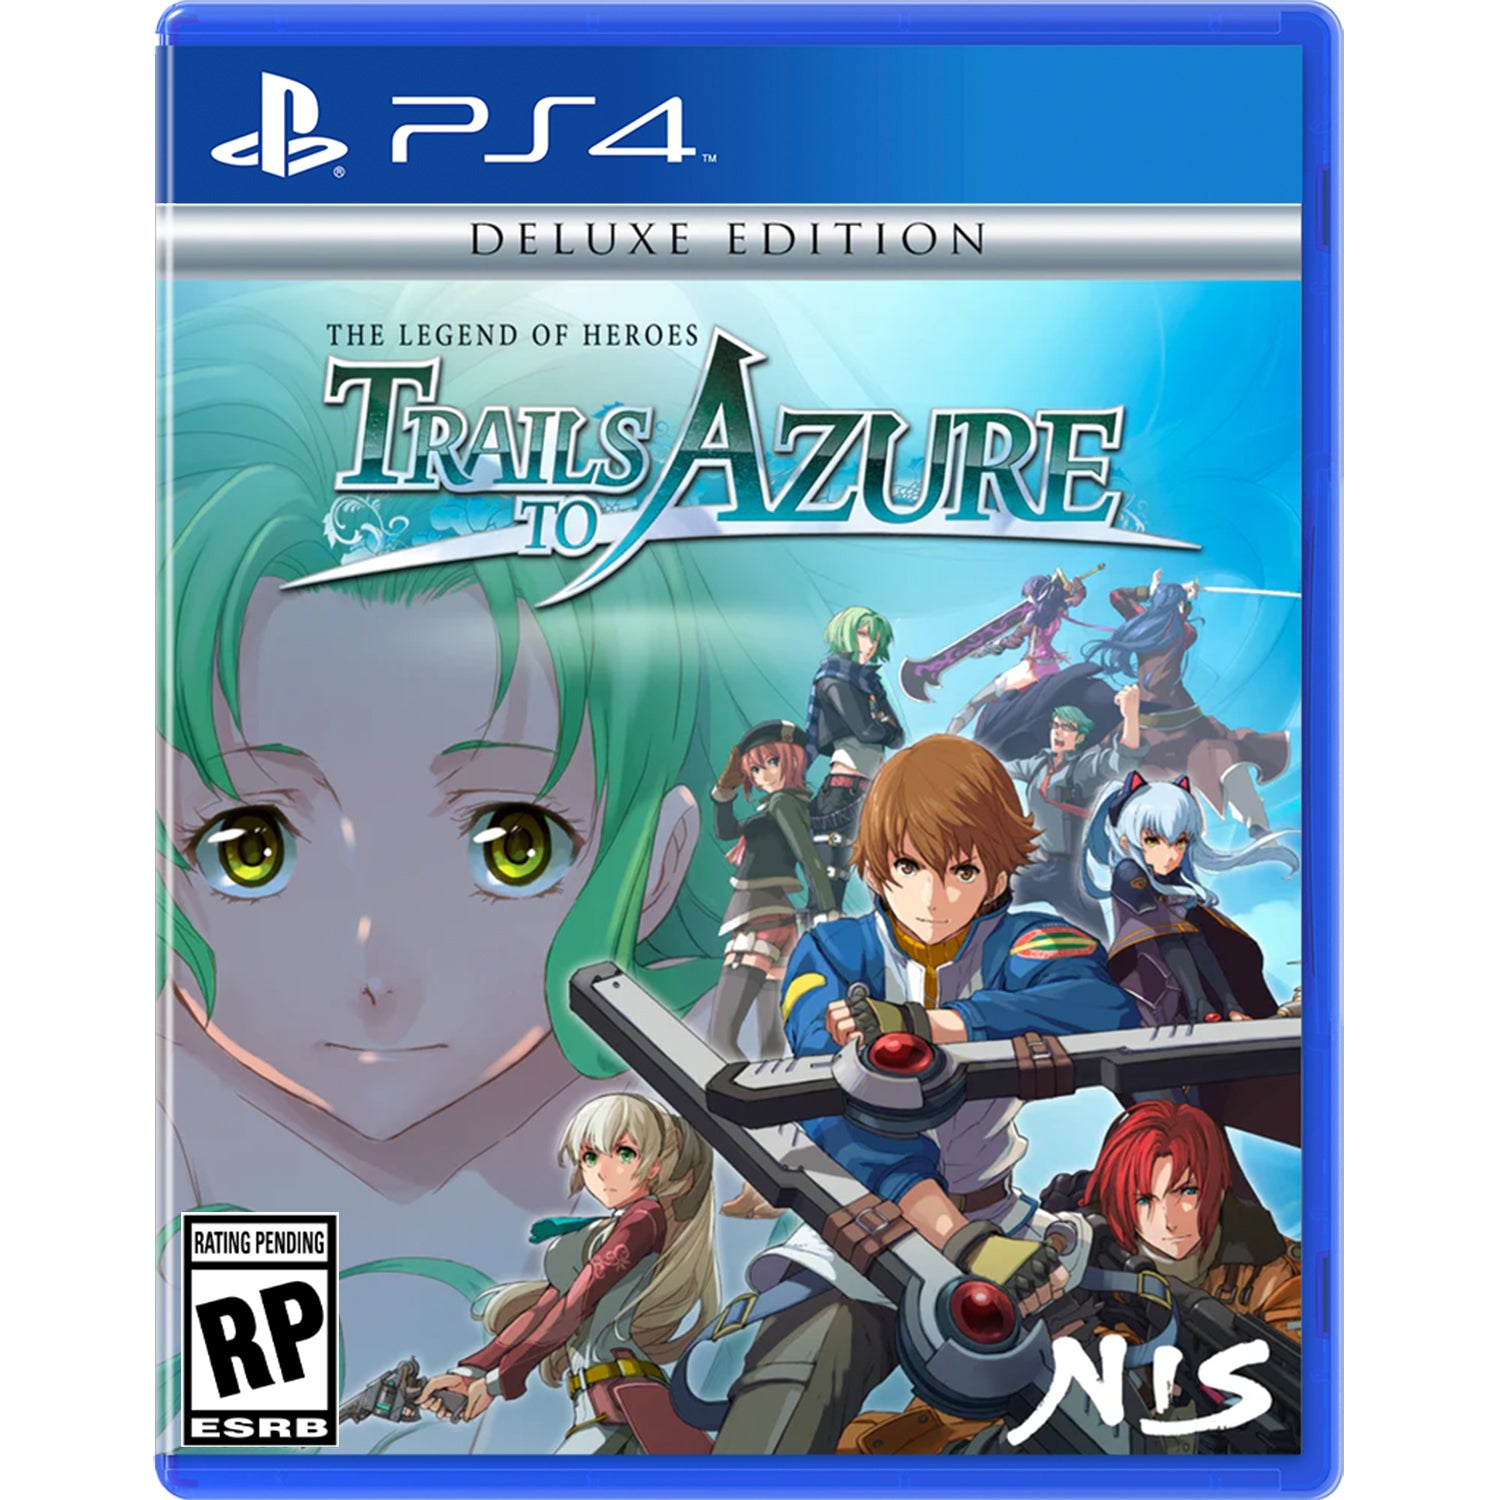 PS4 The Legend of Heroes: Trails to Azure